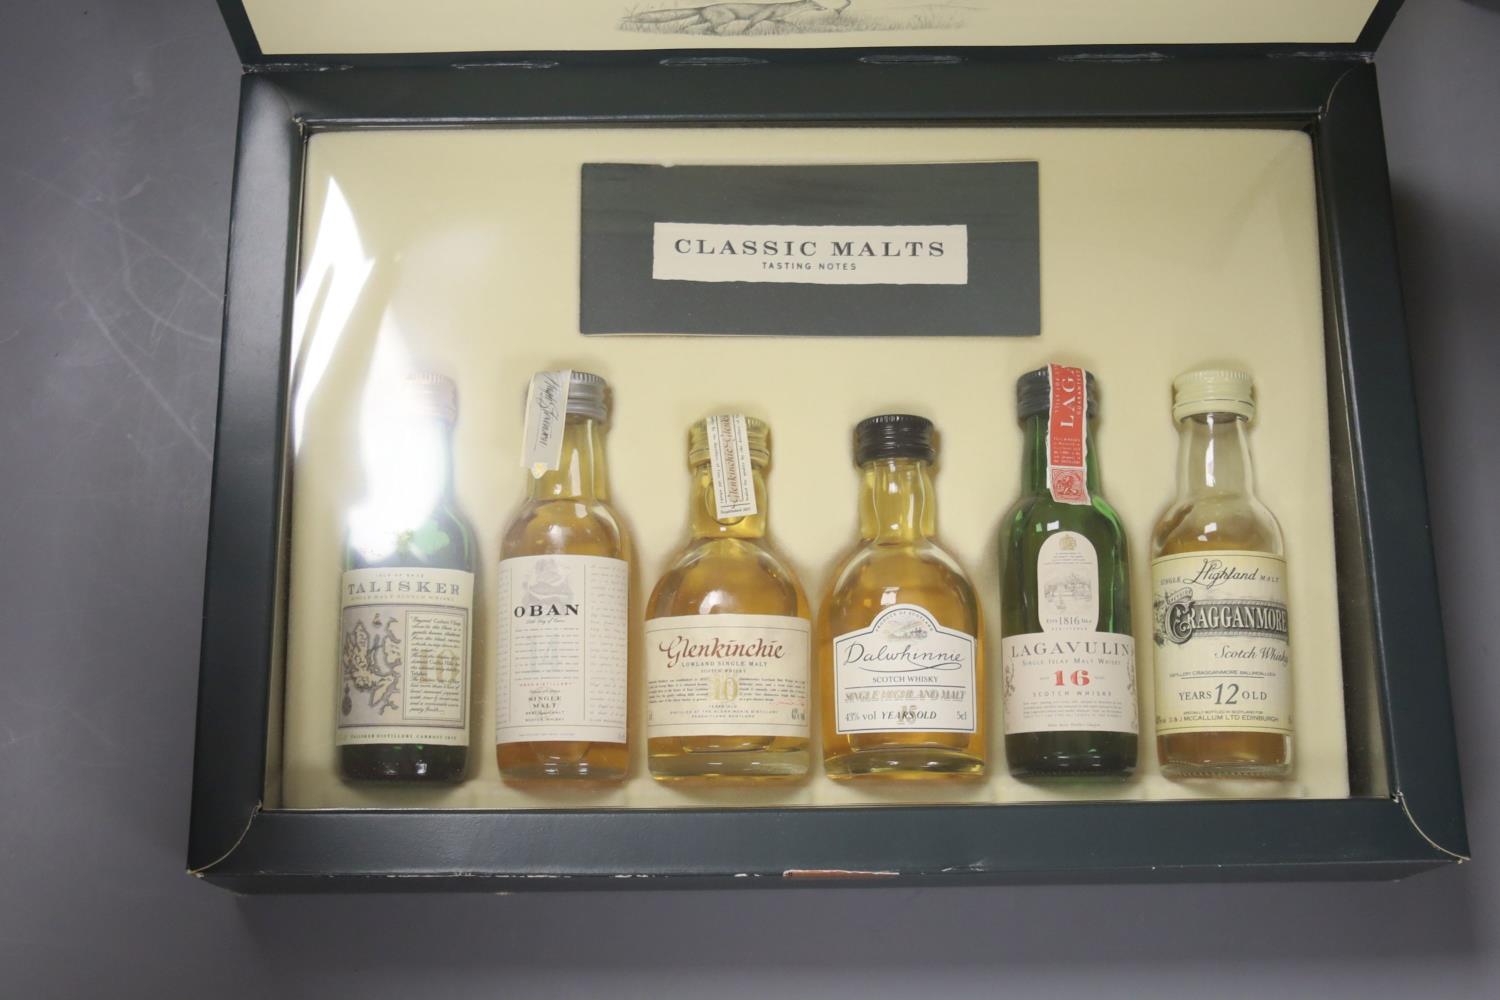 One bottle of Macallan select oak, a boxed Invergordon singles bar and similar classic malts - Image 2 of 2